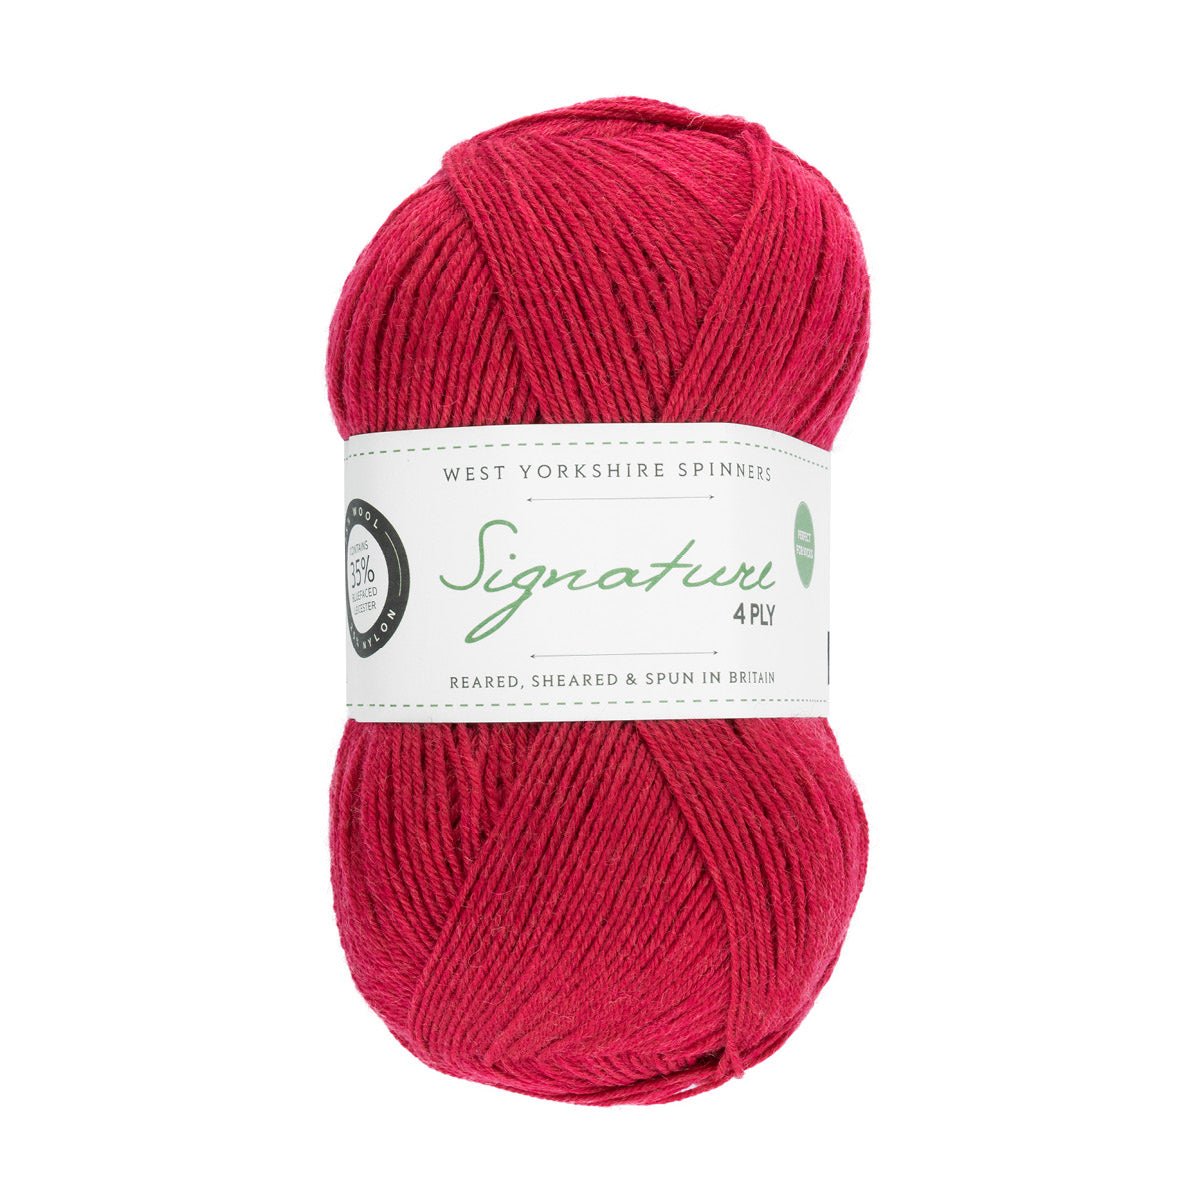 SIGNATURE 4PLY 529-Cherry Drop - West Yorkshire Spinners